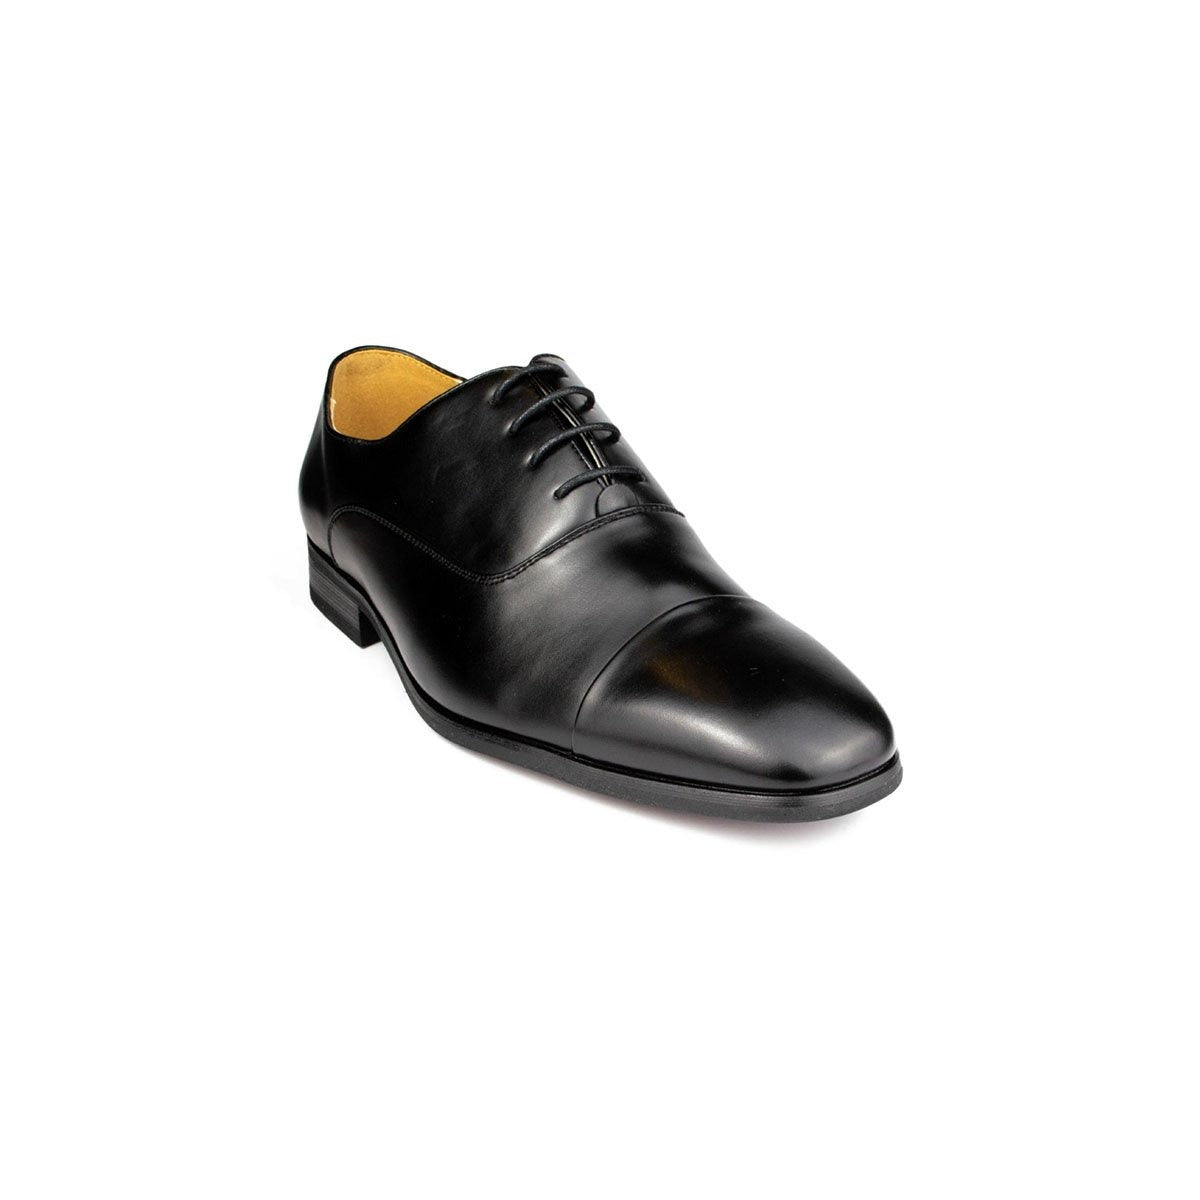 Mens Black Lace Up Oxford Shoe - Watney Shoes 